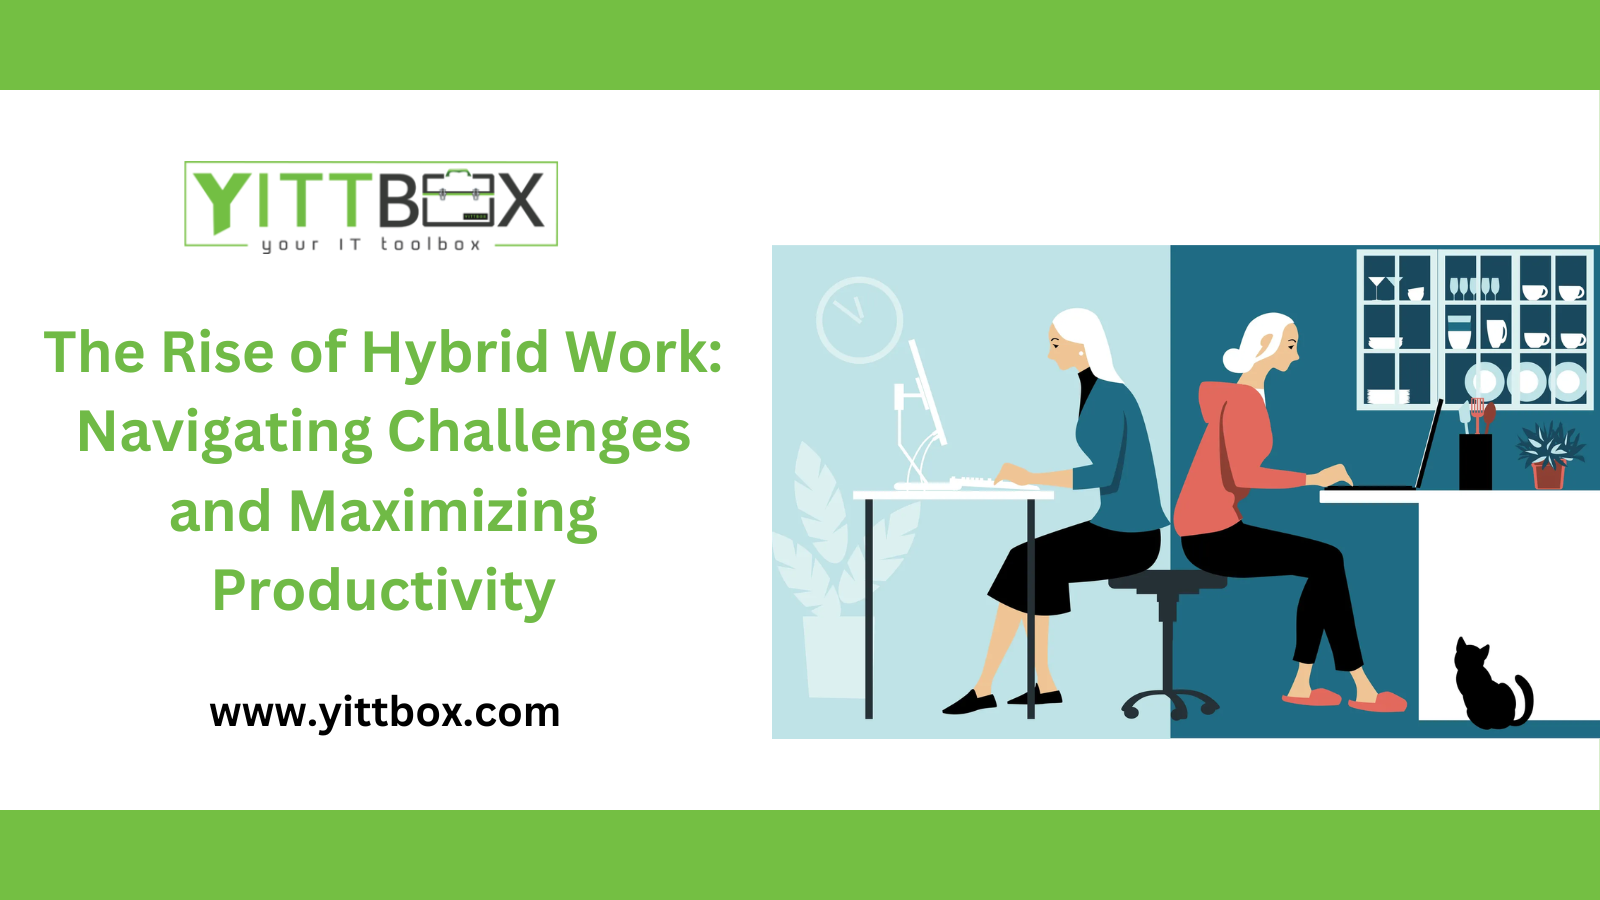 The Rise of Hybrid Work: Navigating Challenges and Maximizing Productivity